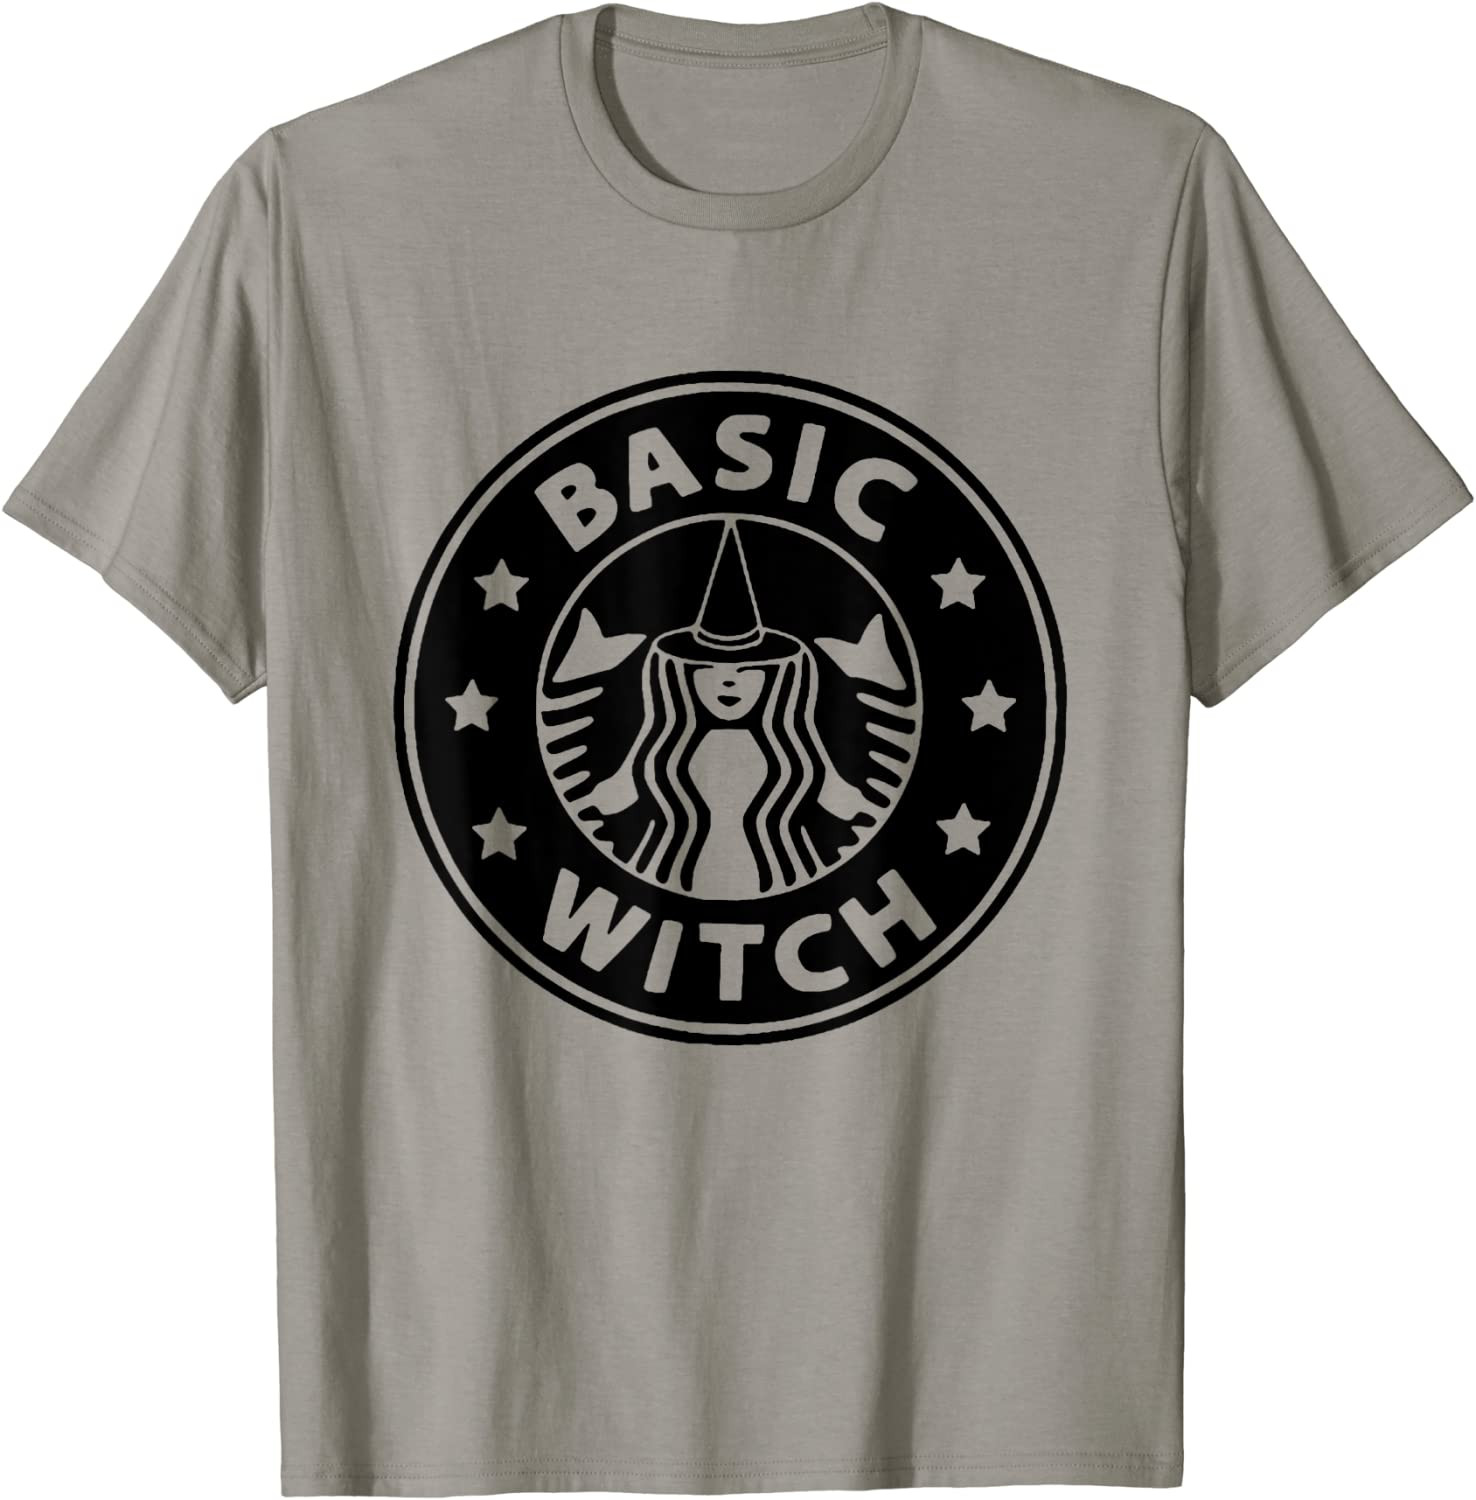 Basic Witch Halloween Costumes T-Shirt